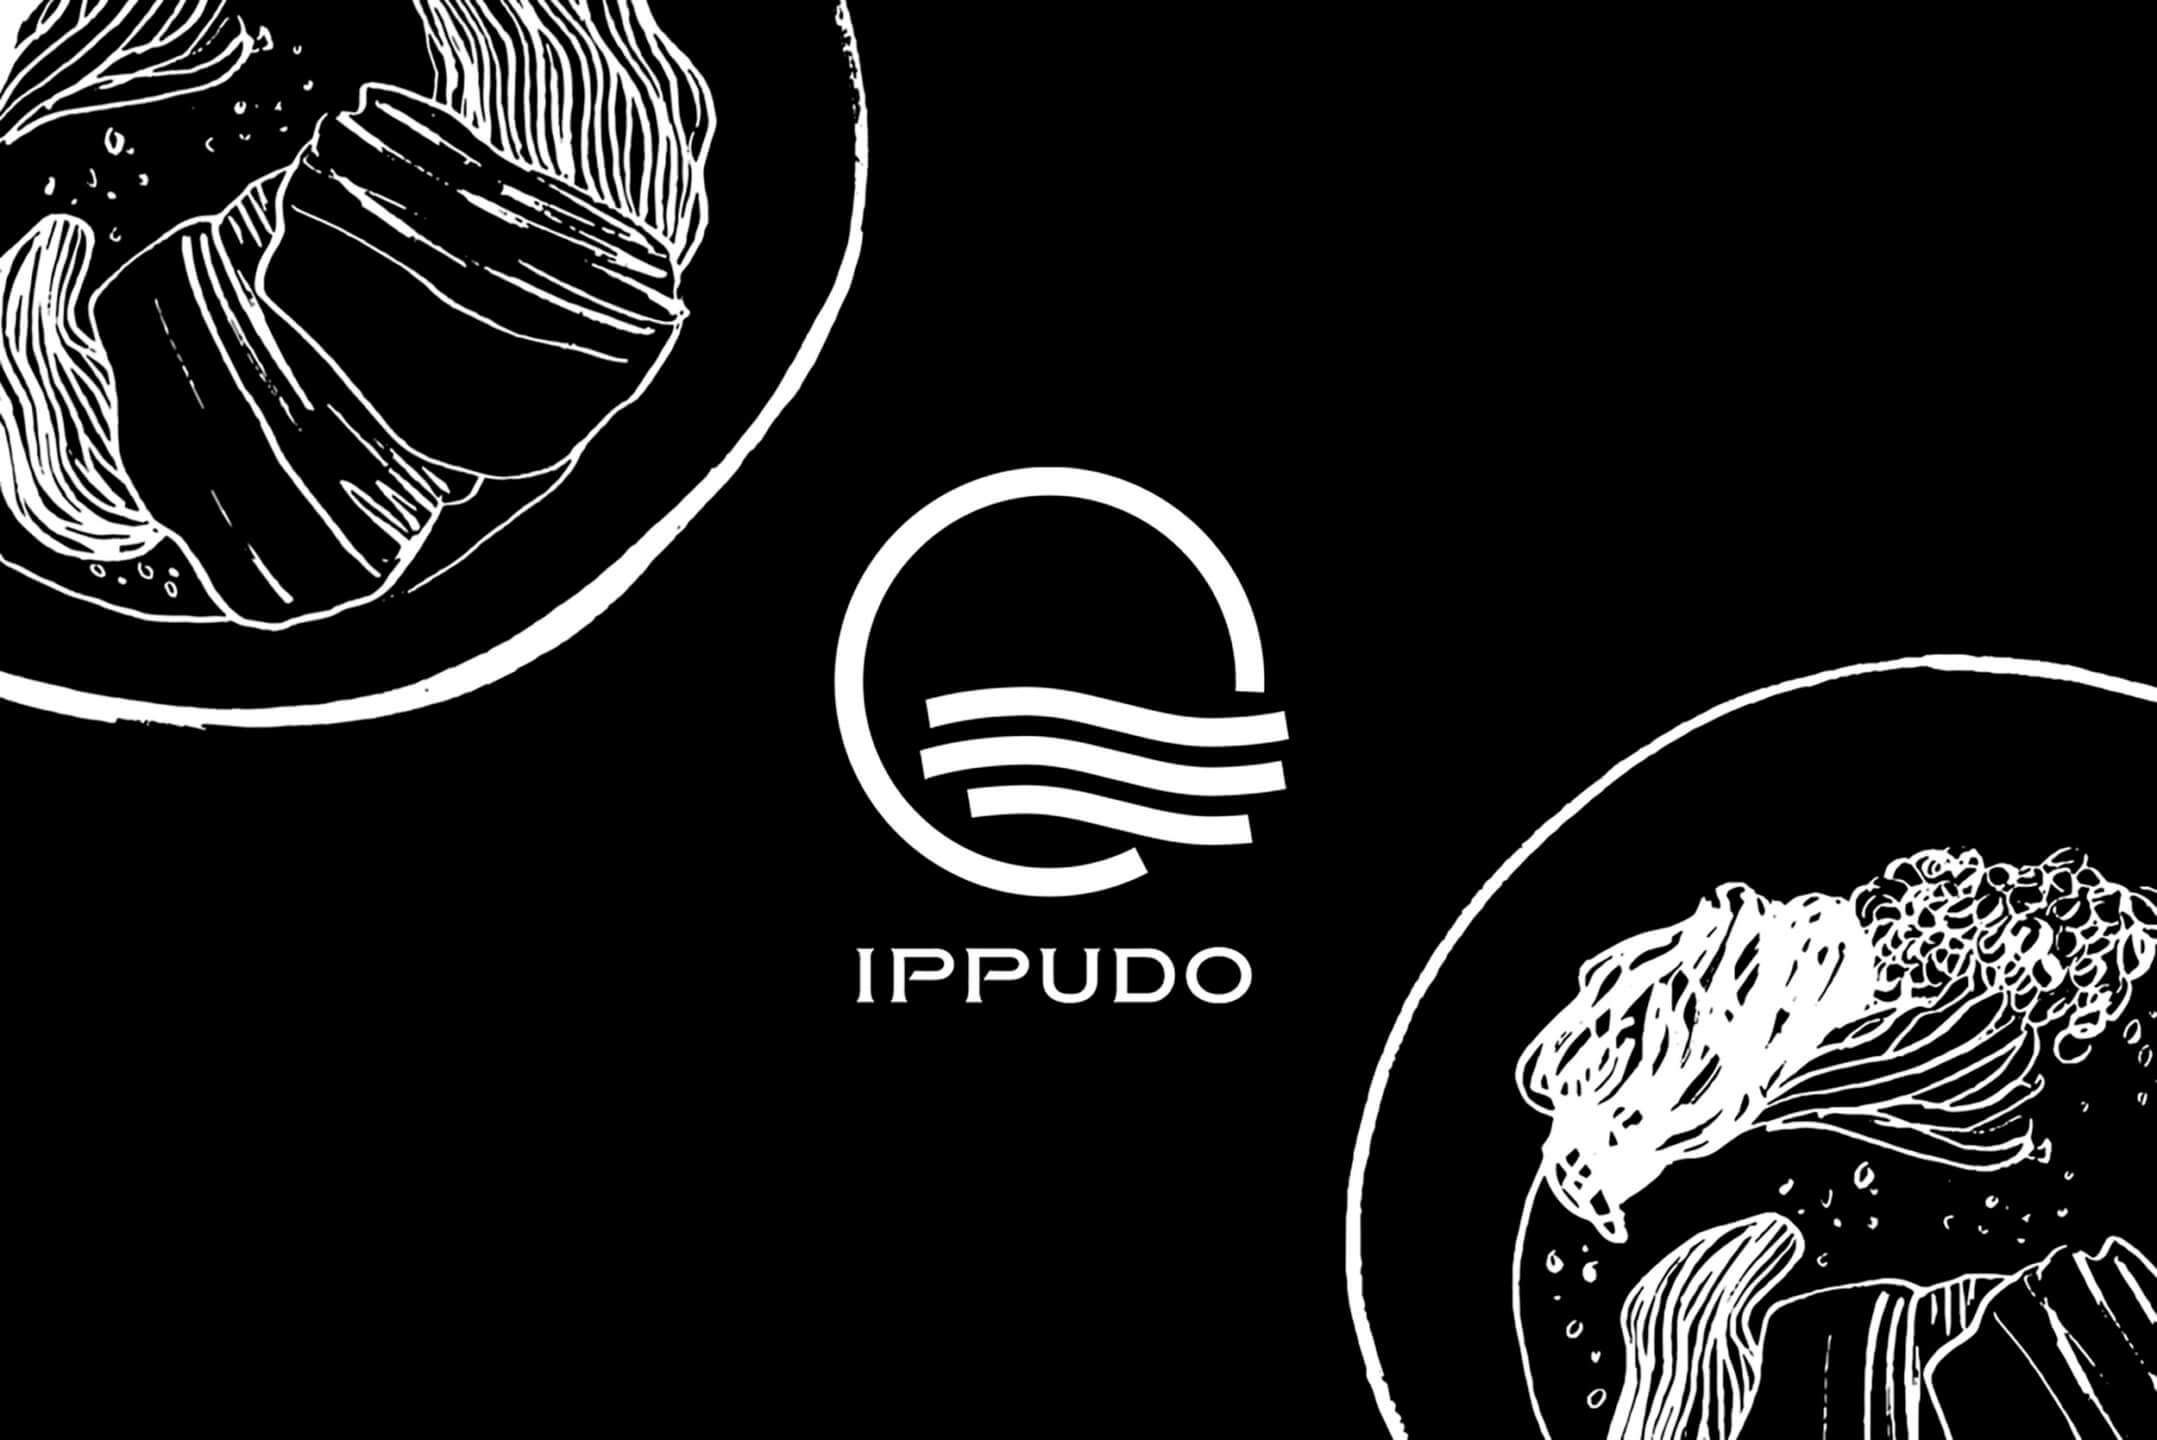 Logo design and detailed illustrations of bowls of ramen for Ippudo